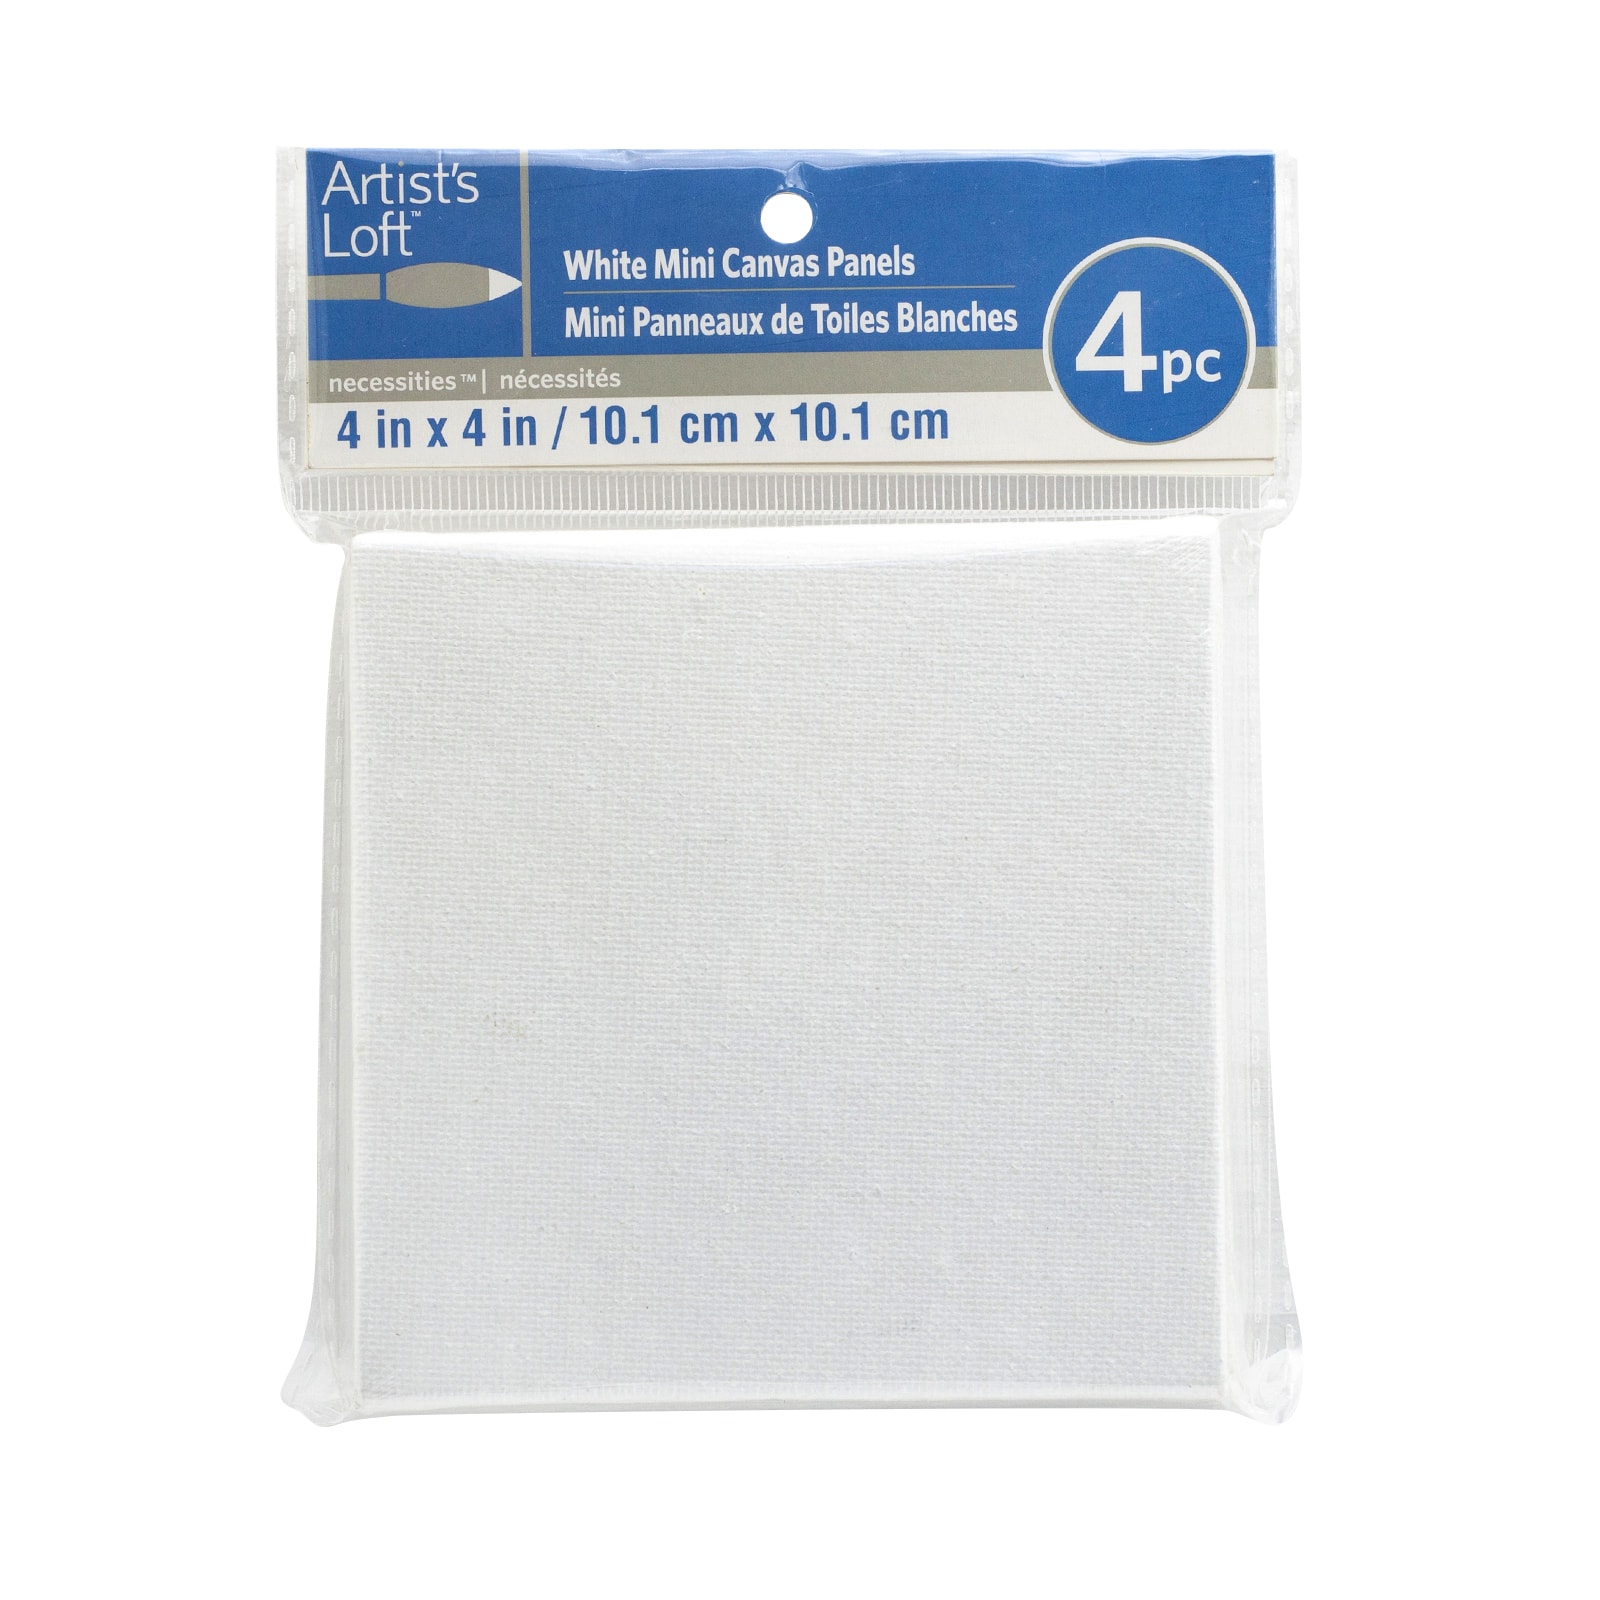 STARVAST Mini Canvas Panels 4 x 4 Pack of 24, Cotton Stretched Canvas for Paintings Craft Small Acrylics Oil Projects